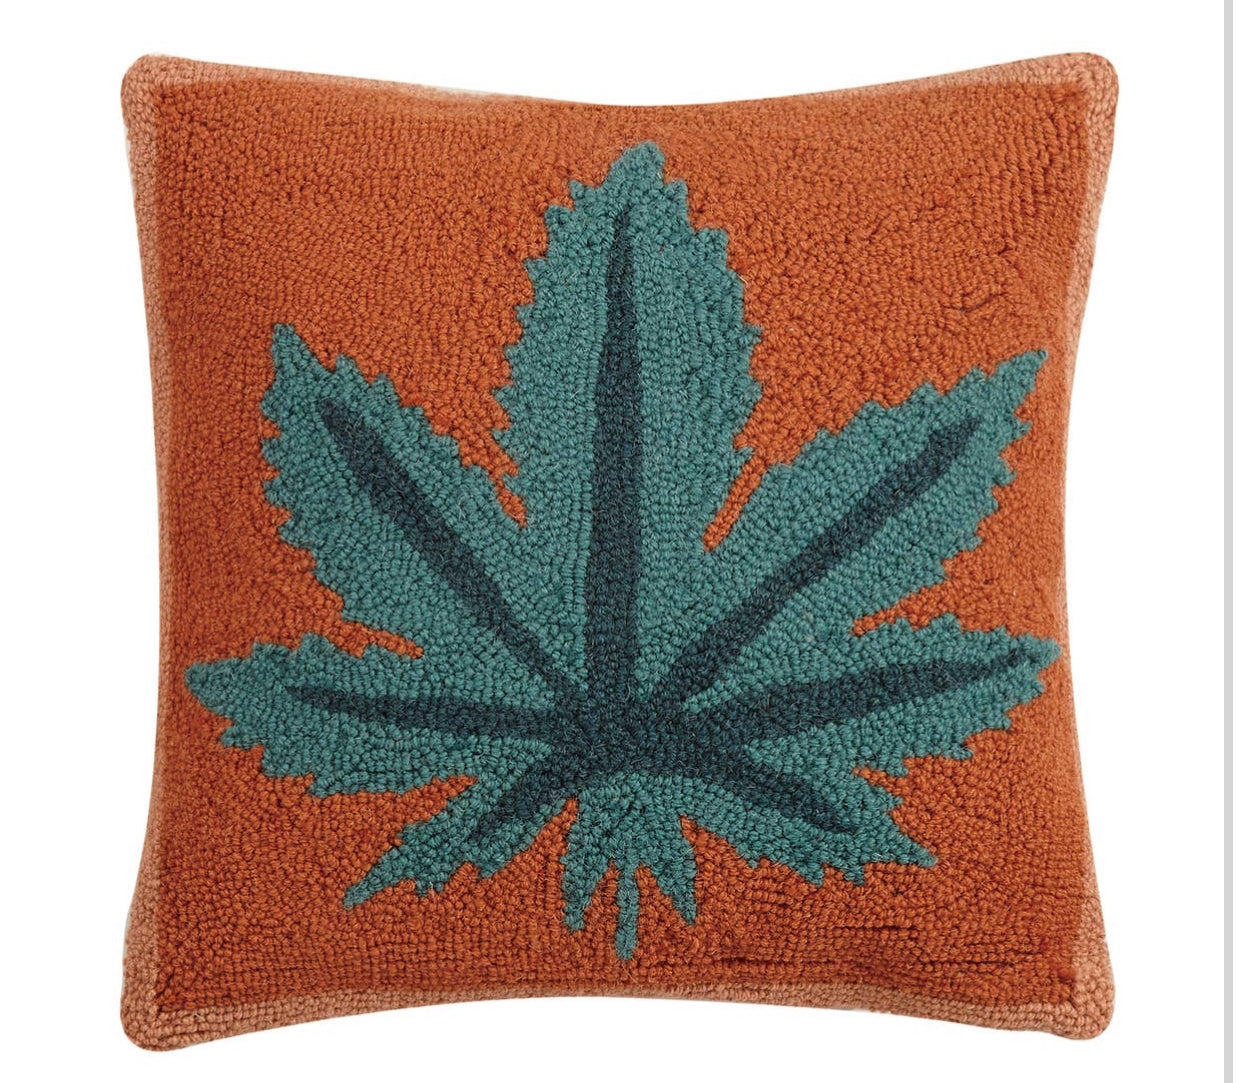 Mary Jane Hook Pillow